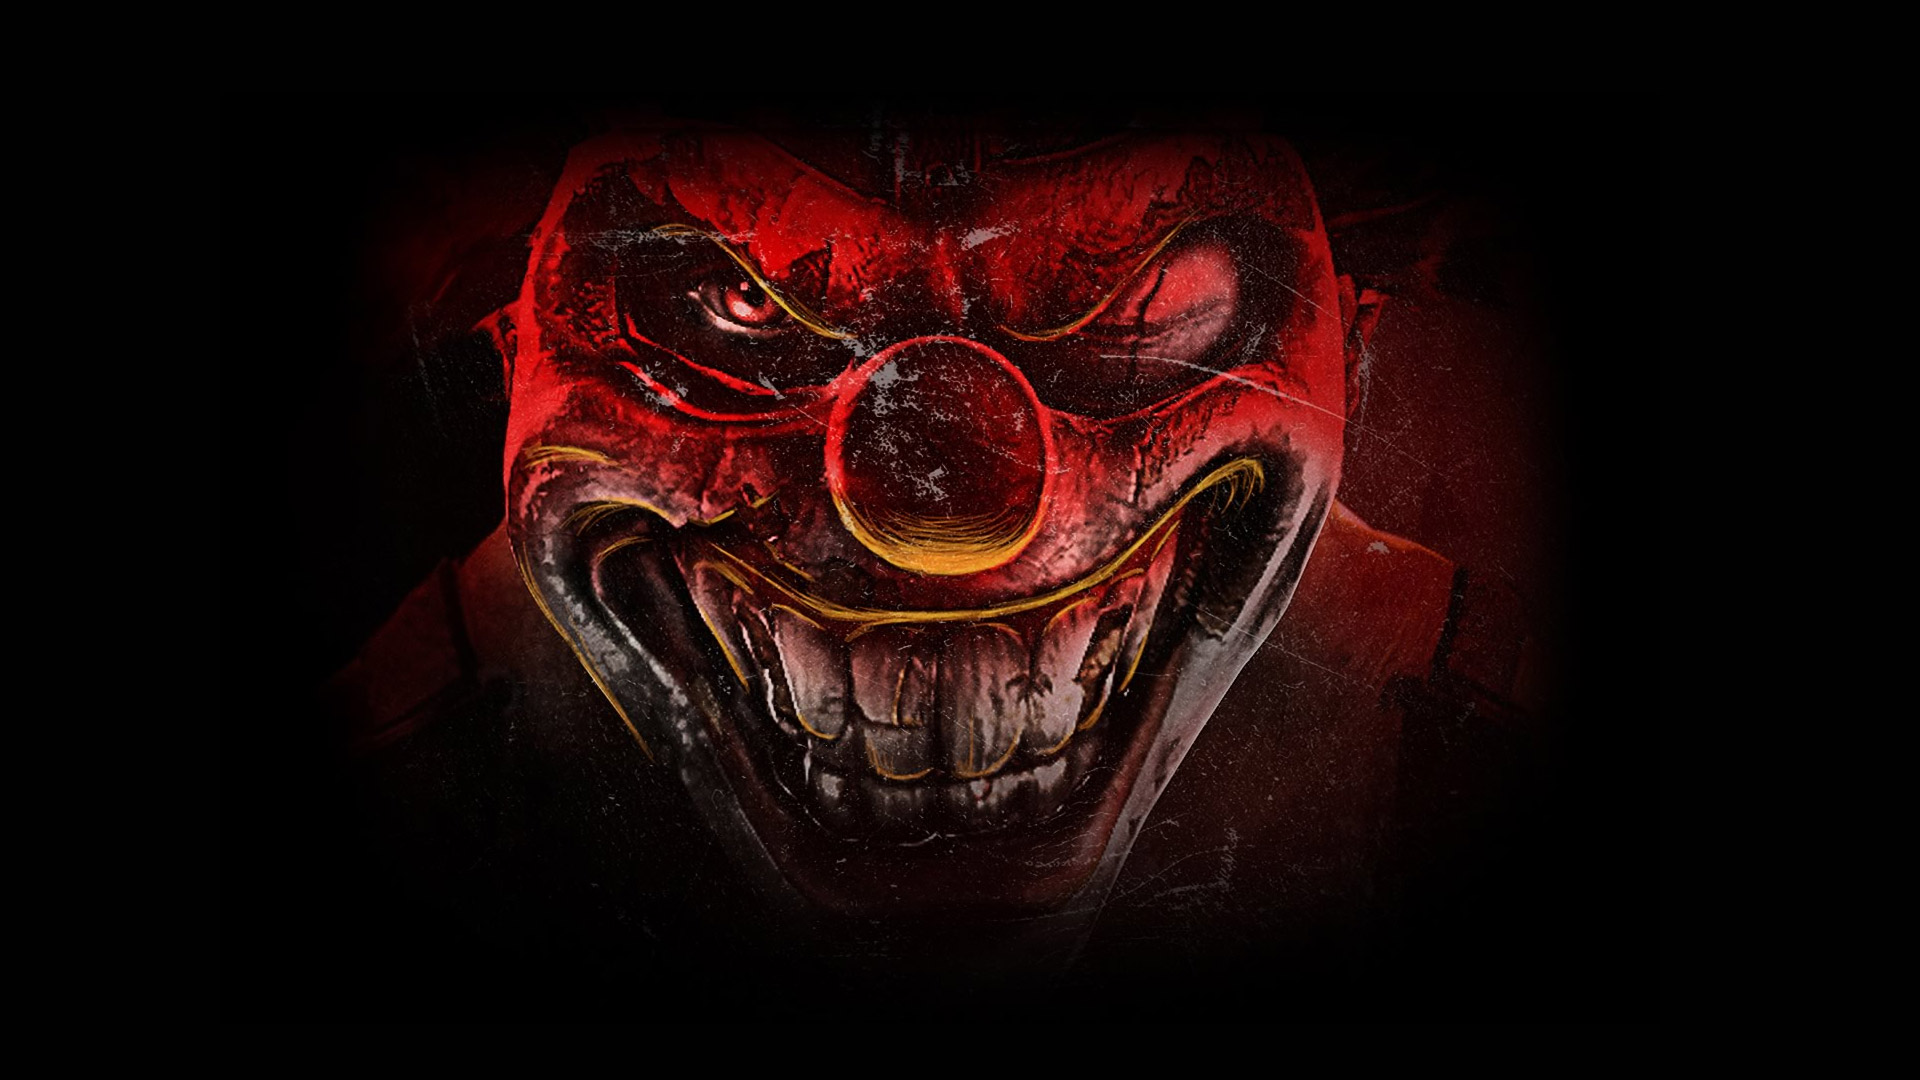 High Resolution Wallpaper | Twisted Metal 1920x1080 px